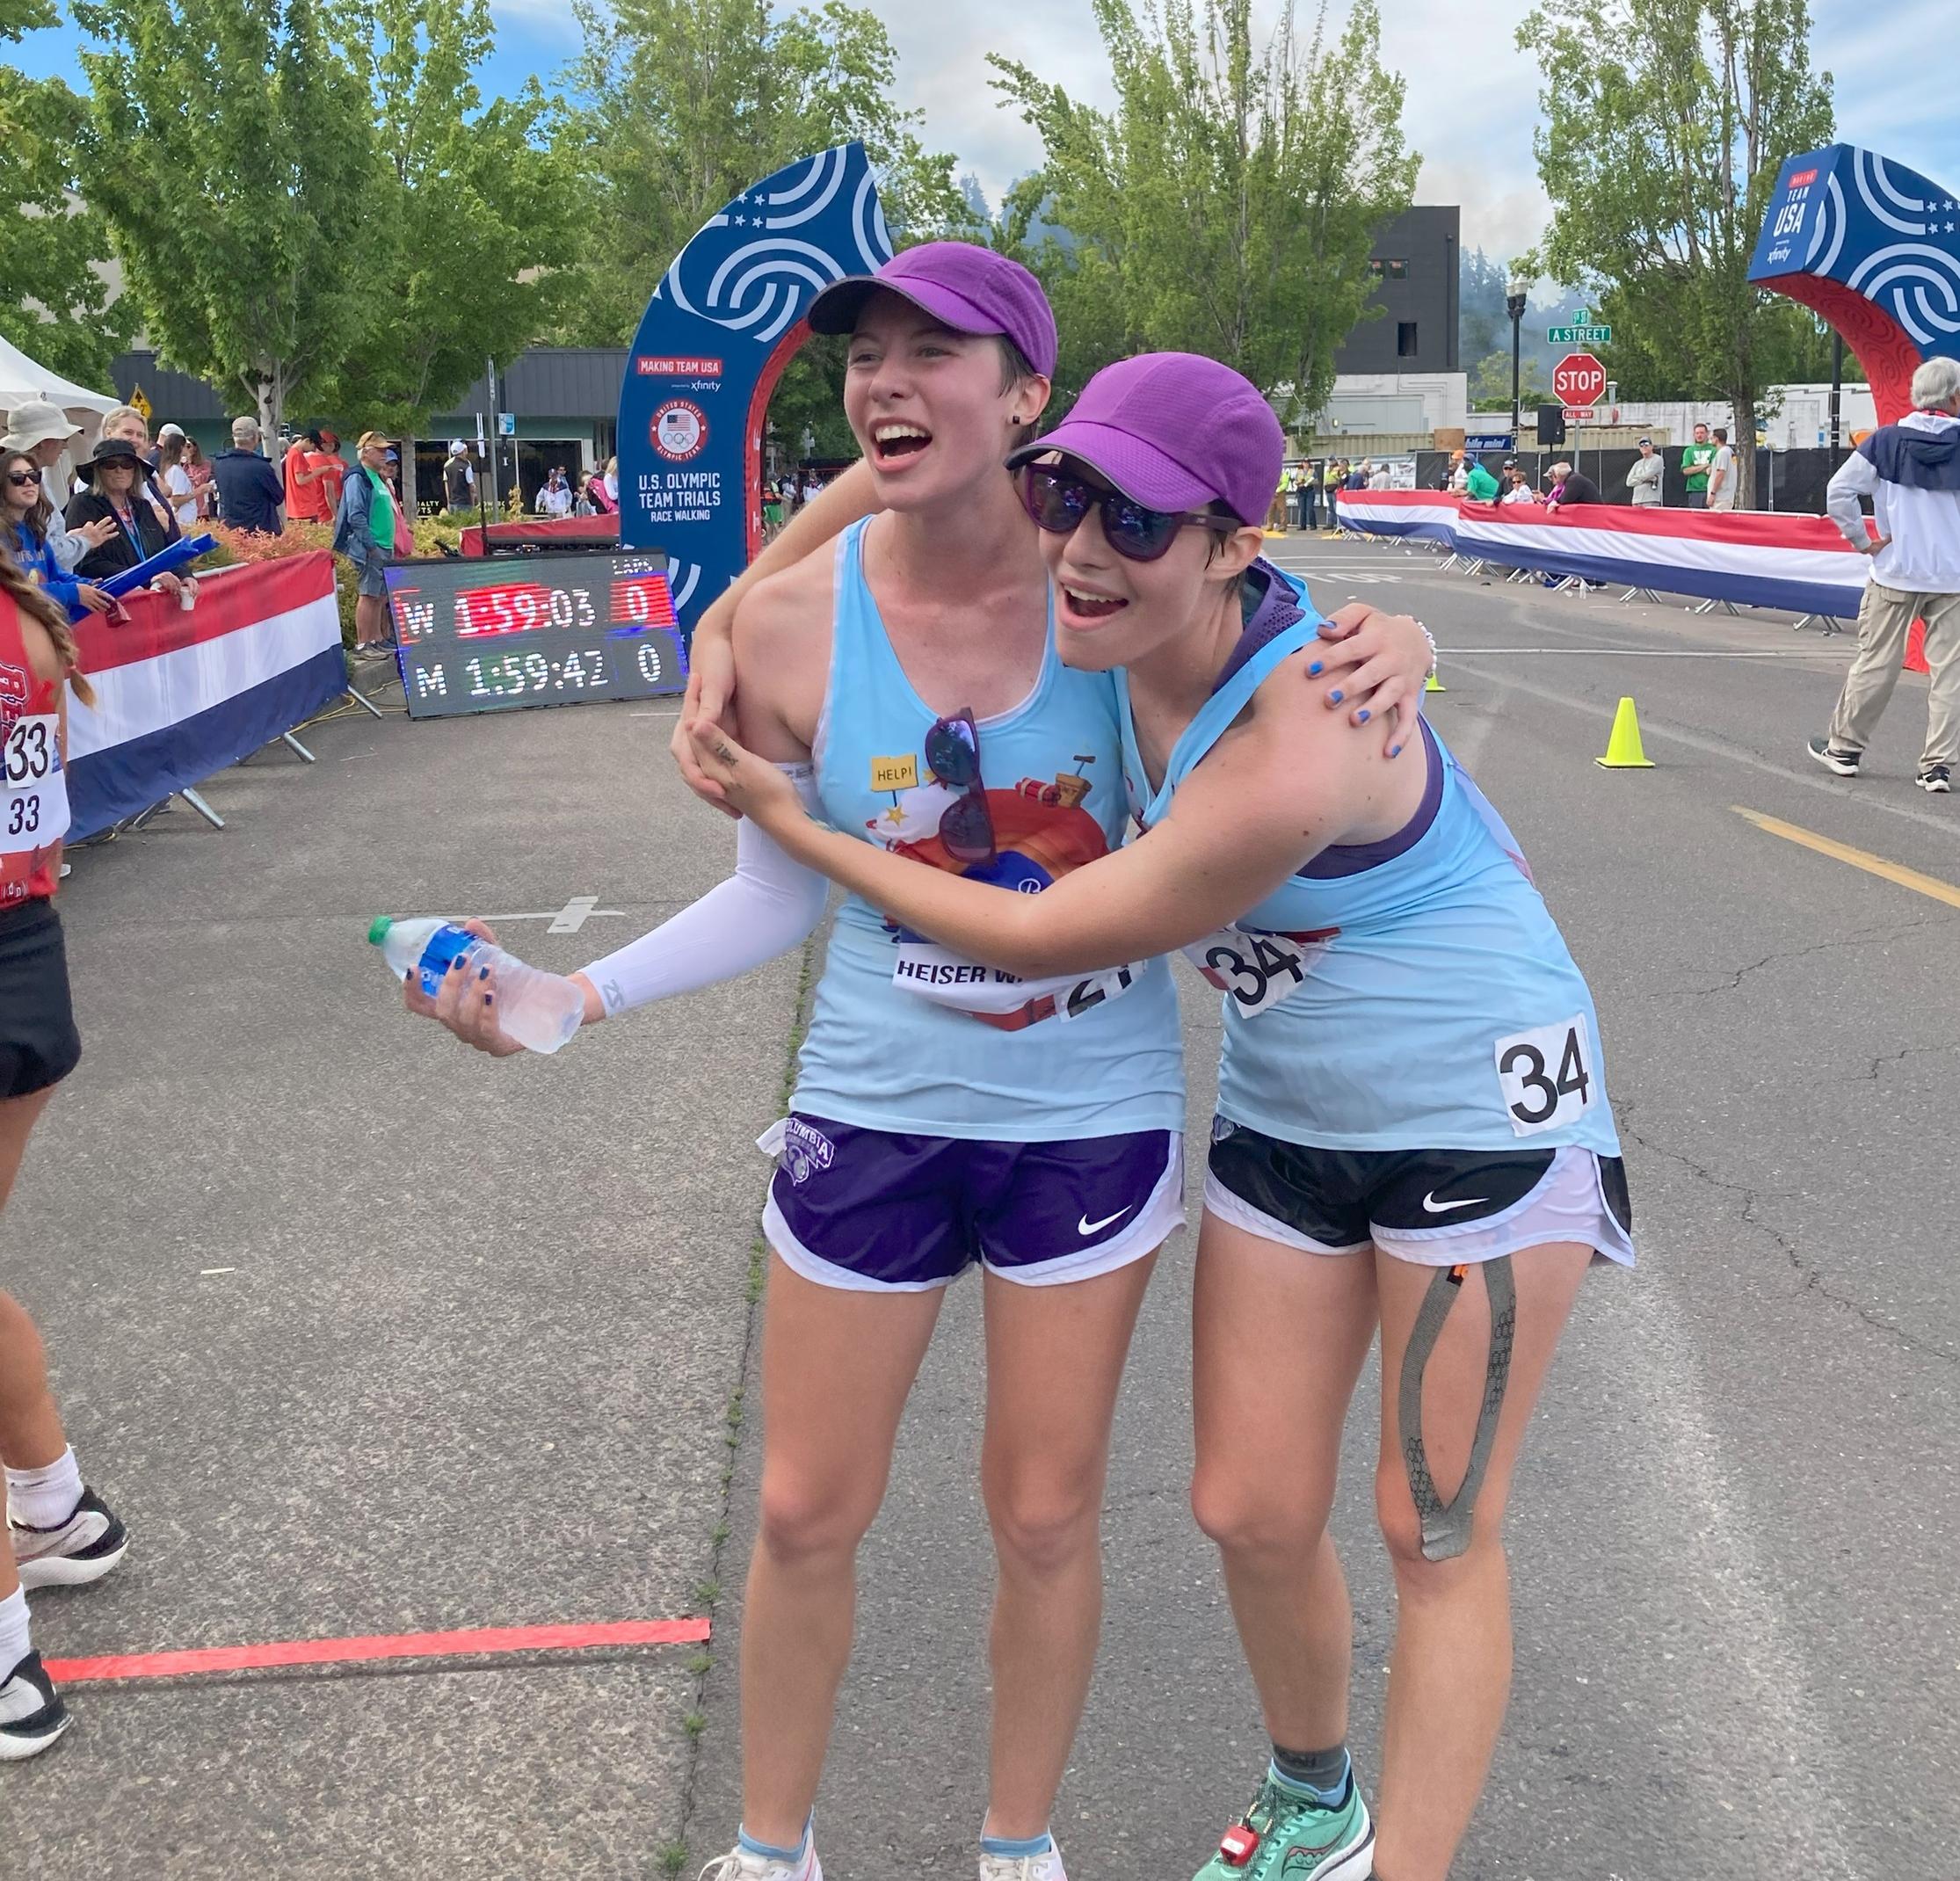 in the finish area, Jesi (right) says "it looks like I am hugging Tori but really I just needed something to lean on so I didn't fall over!", courtesy of Ian Whatley